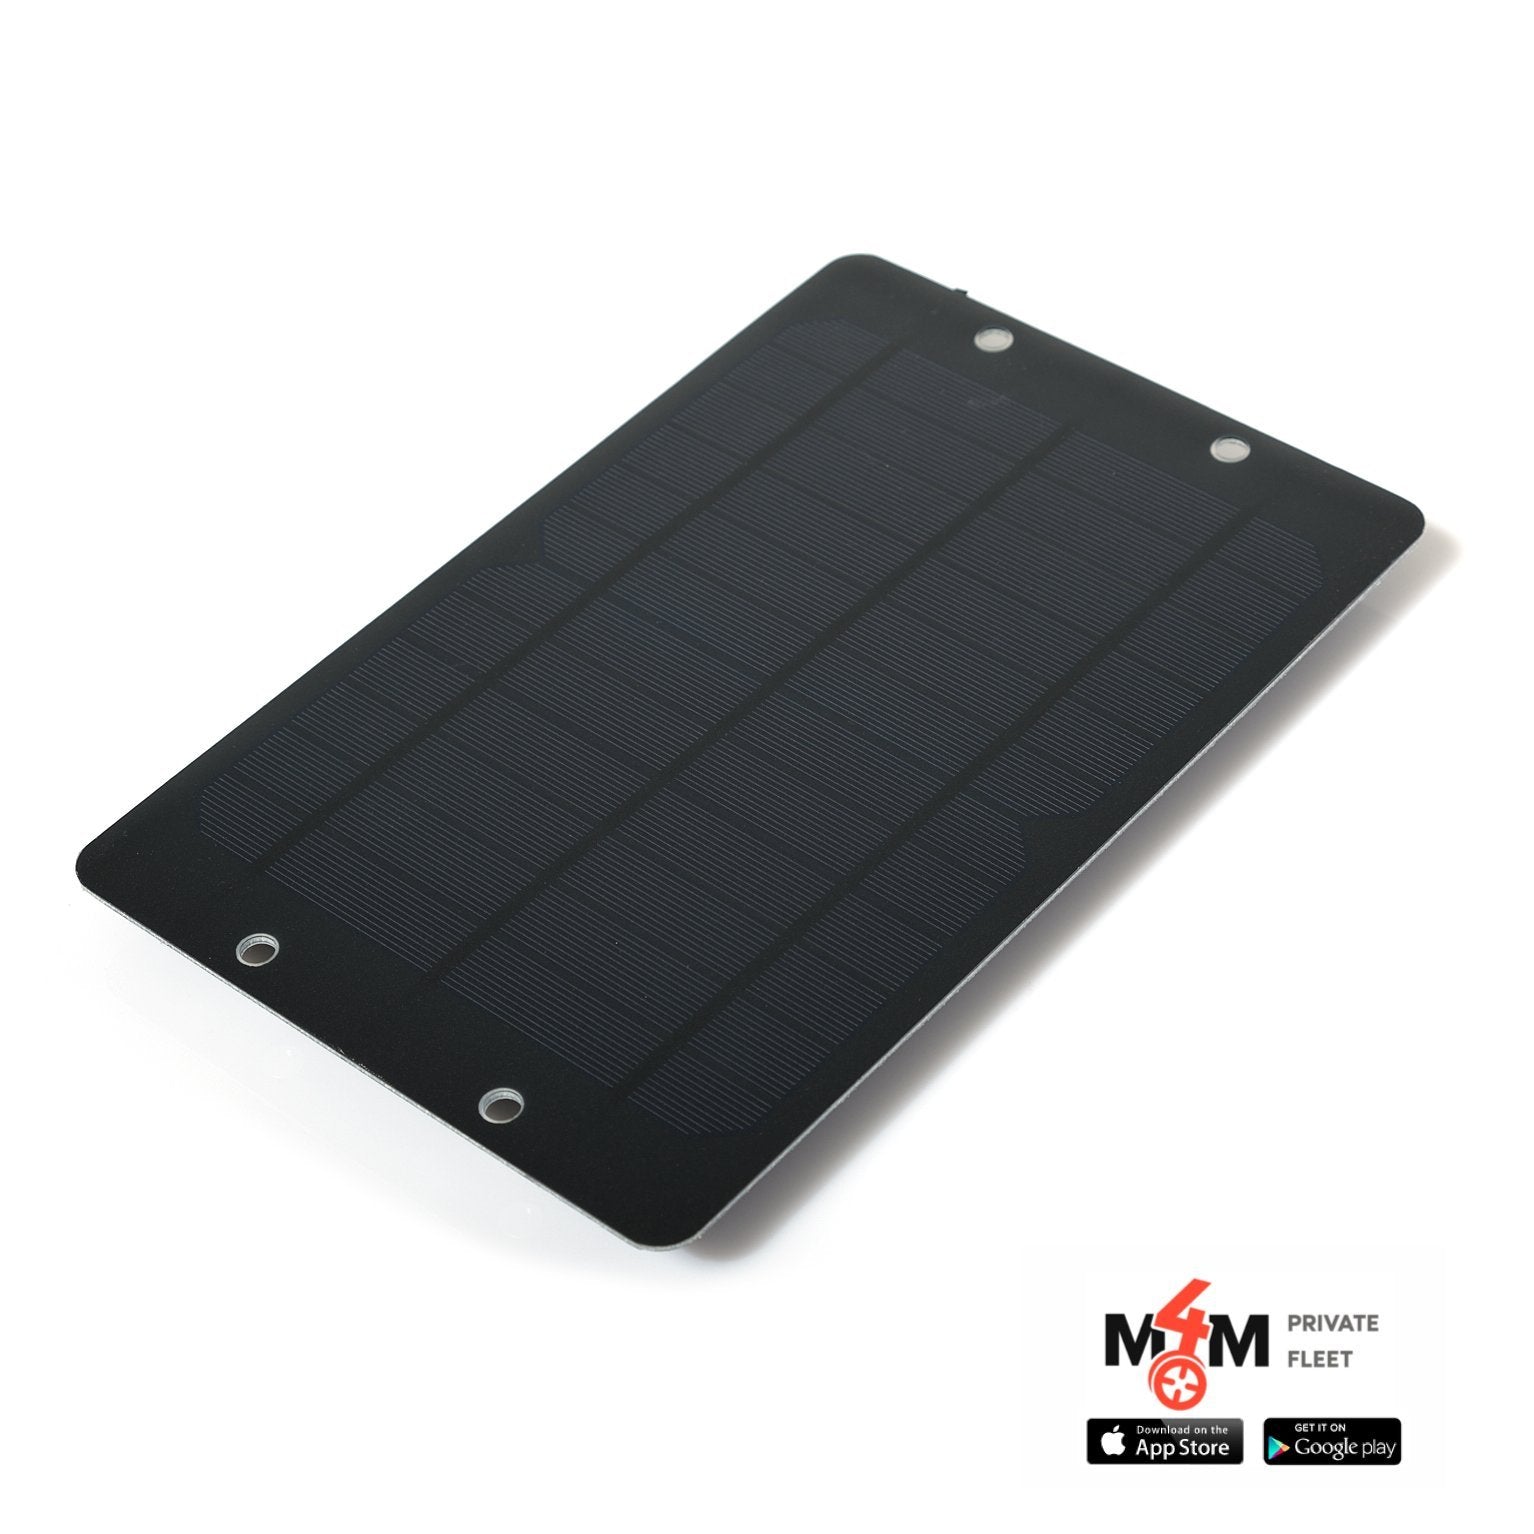 Solar Panel for M4M IoT 4G Shareable Bicycle Lock